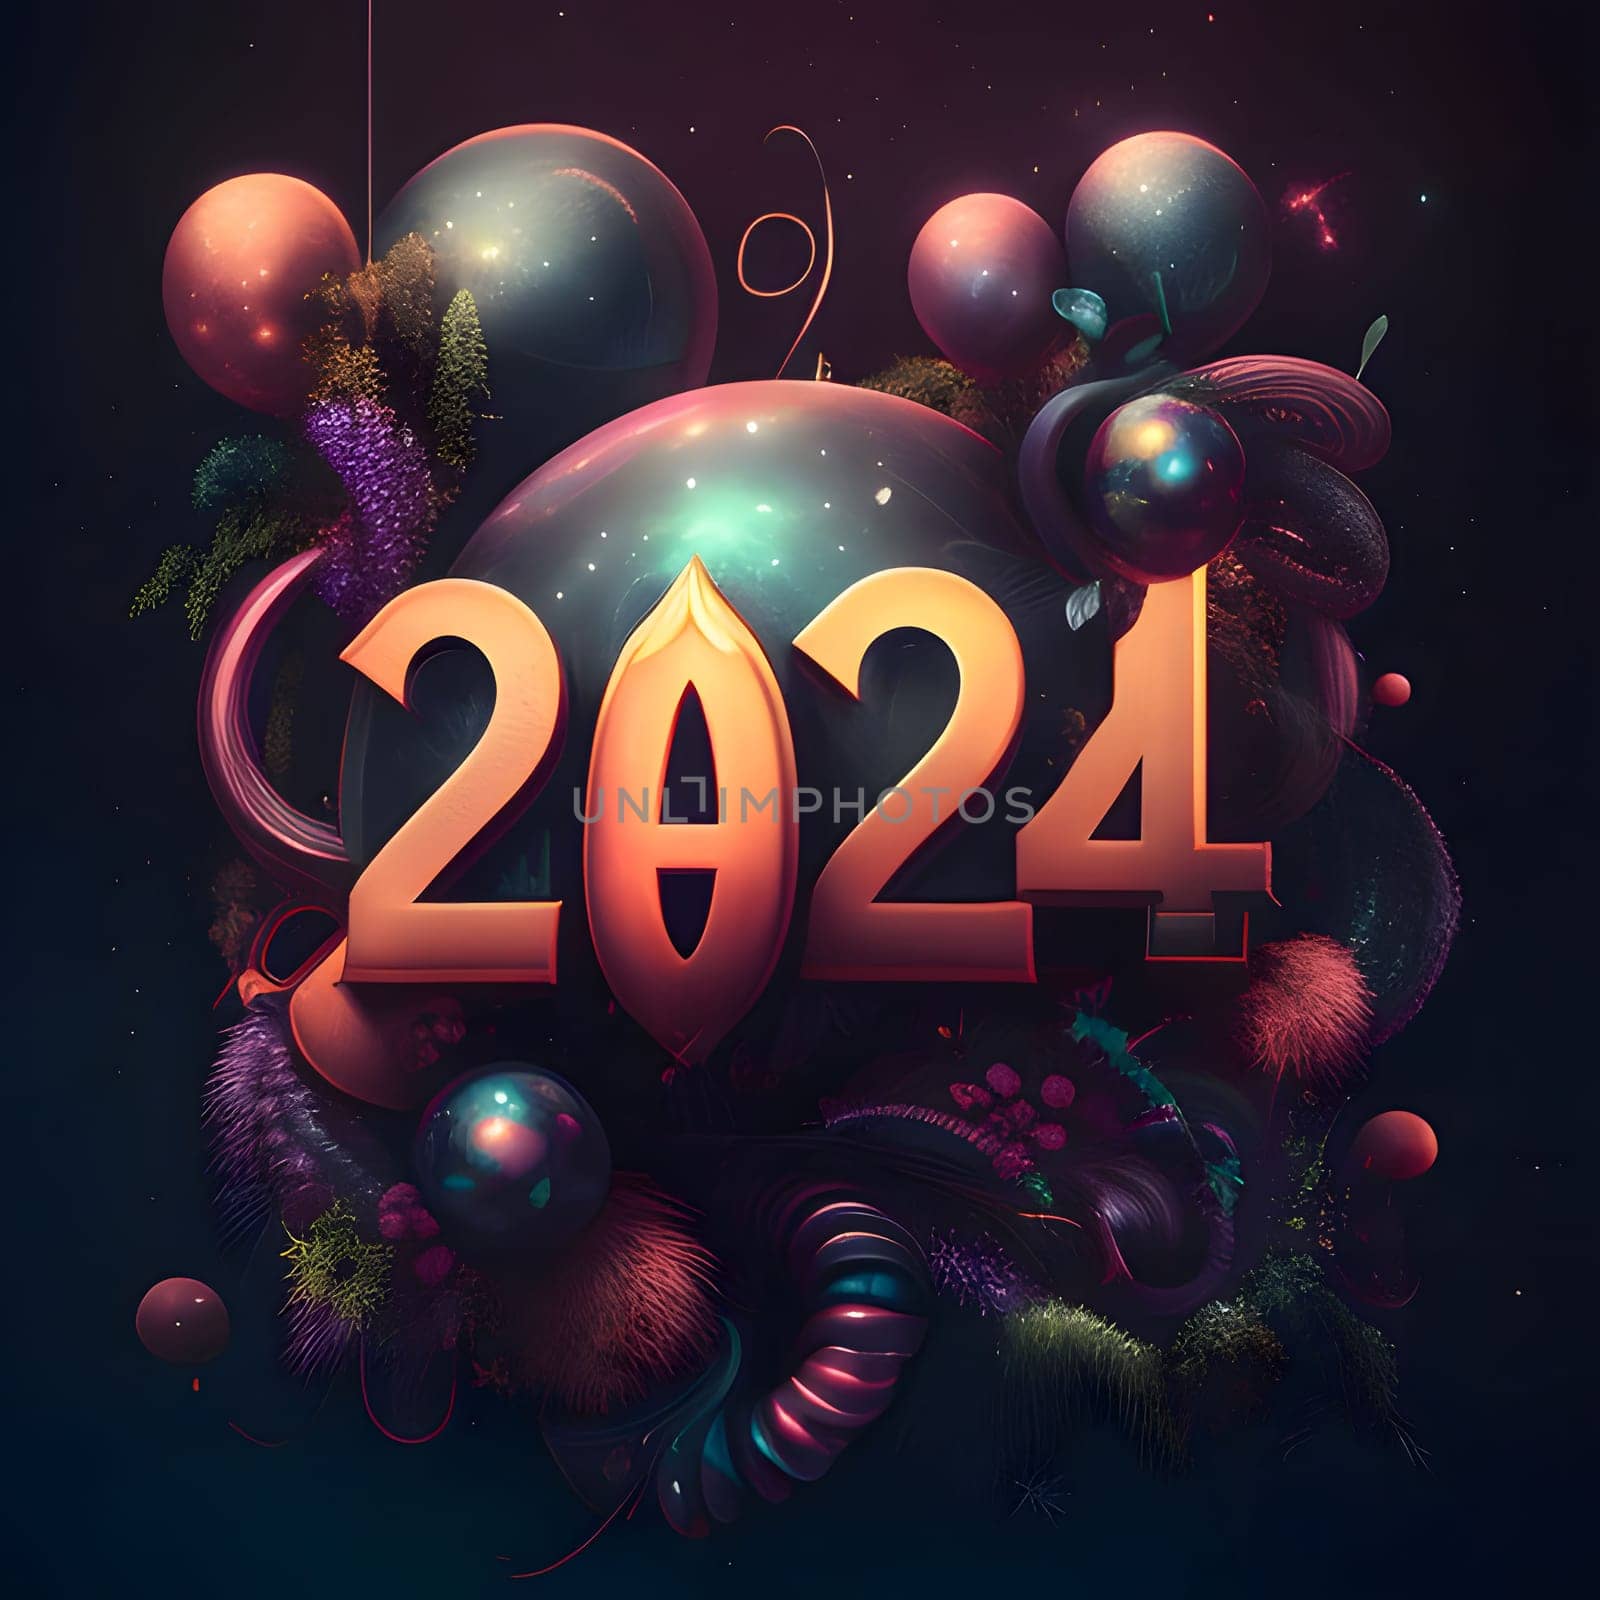 Card, illustration, graphic with futuristic image, inscription 2024 to celebrate the new year. by ThemesS